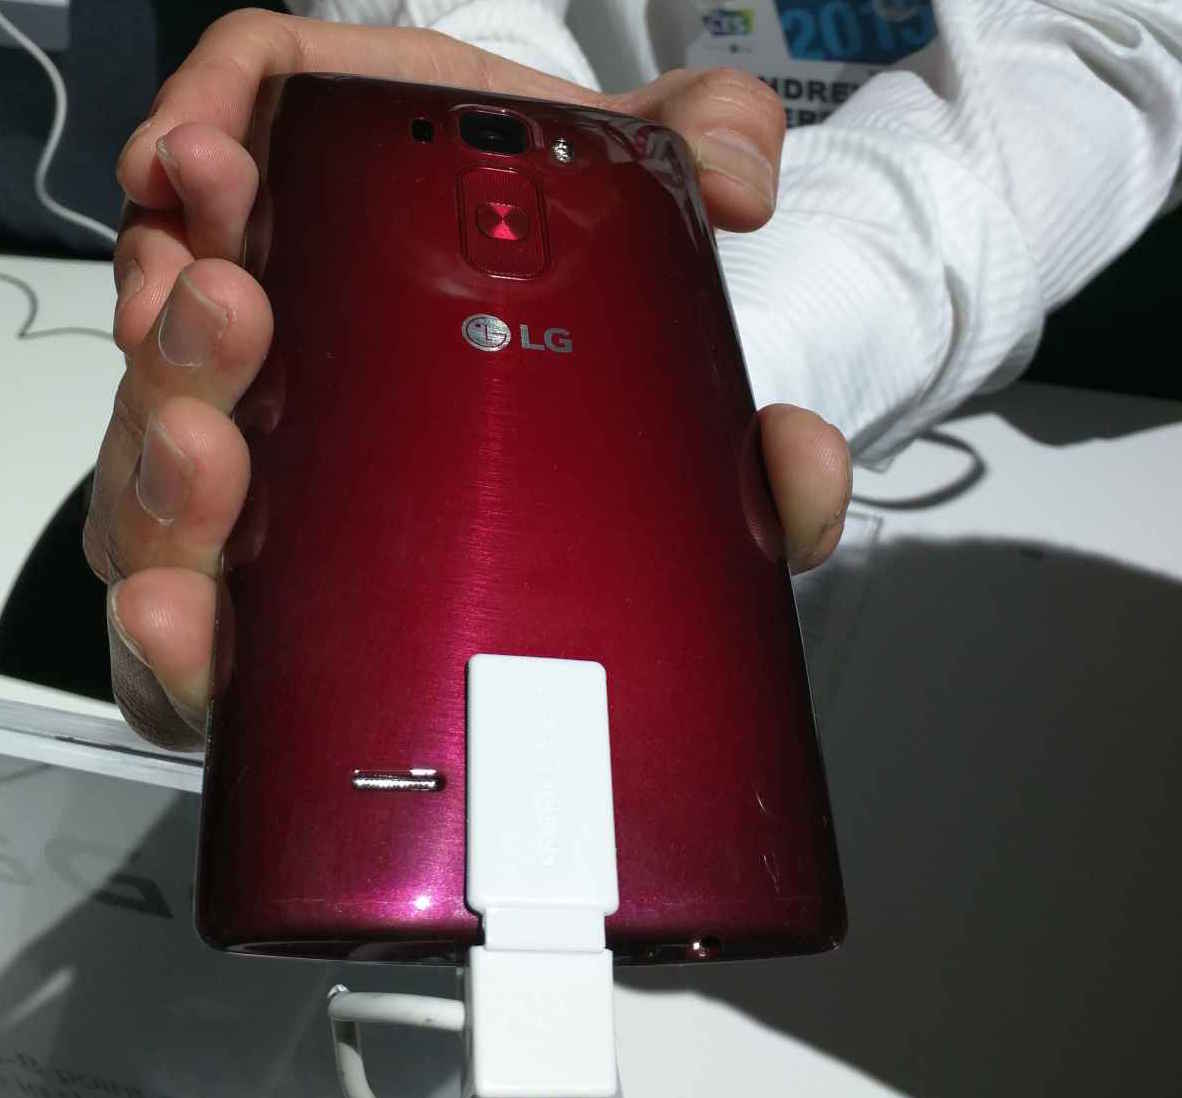 CES 2015: The LG G Flex 2 Ushers In The Next Generation of Android Smartphones